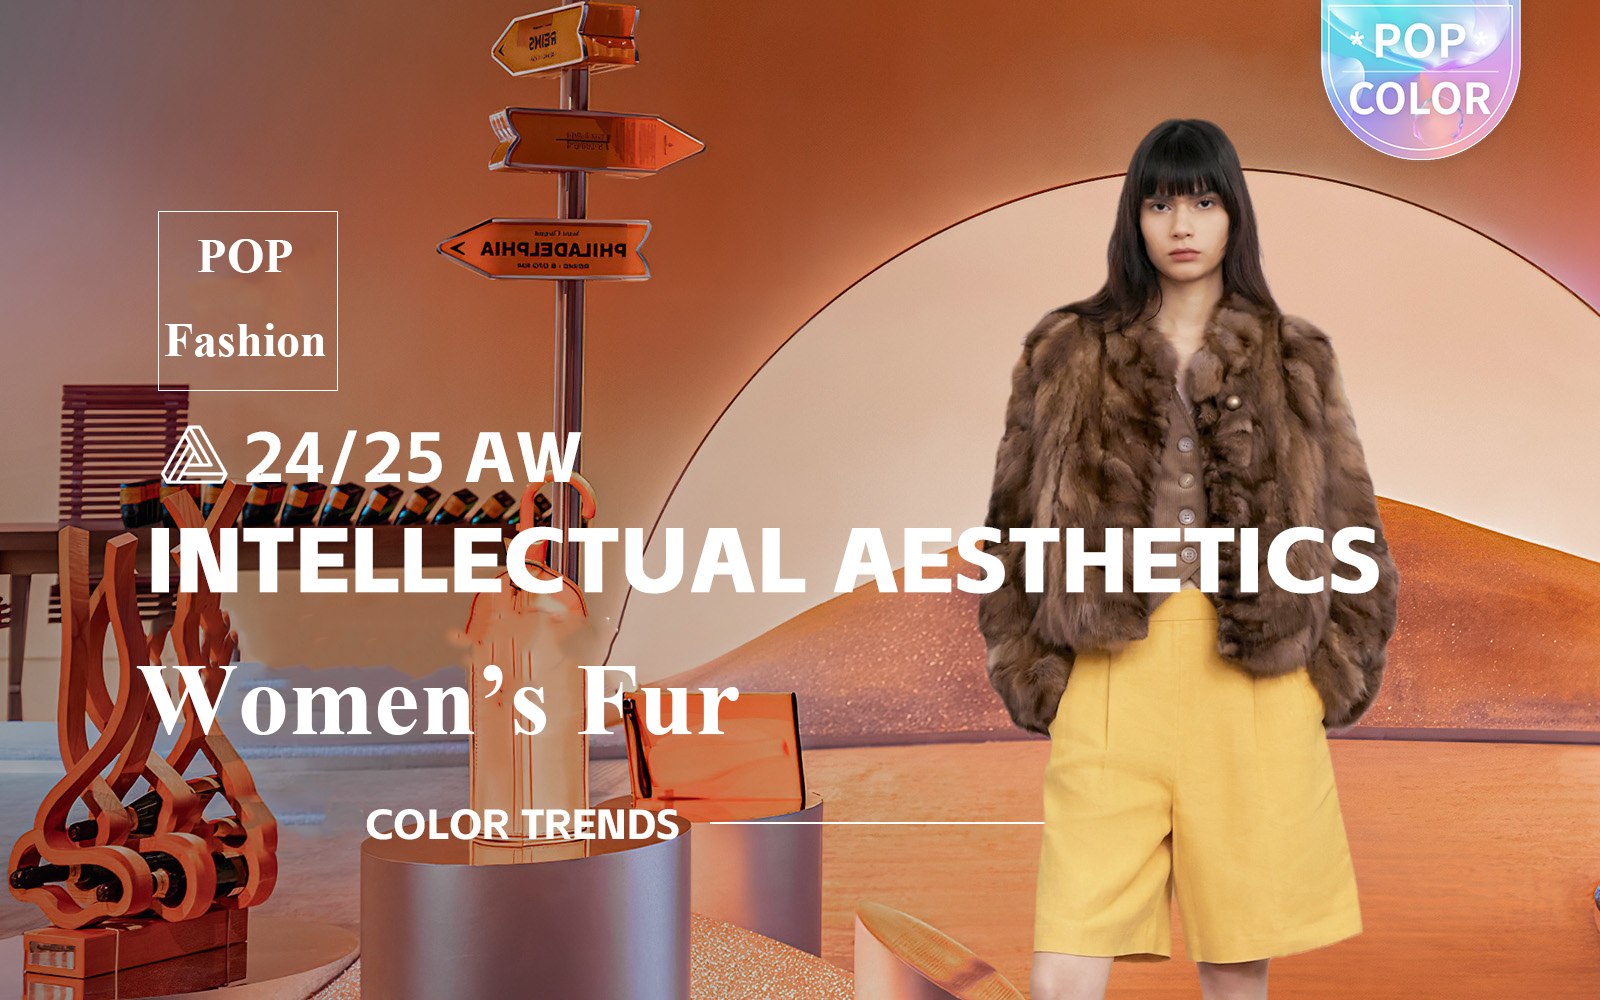 Intellectual Aesthetics -- The Color Trend for Women's Fur Clothing